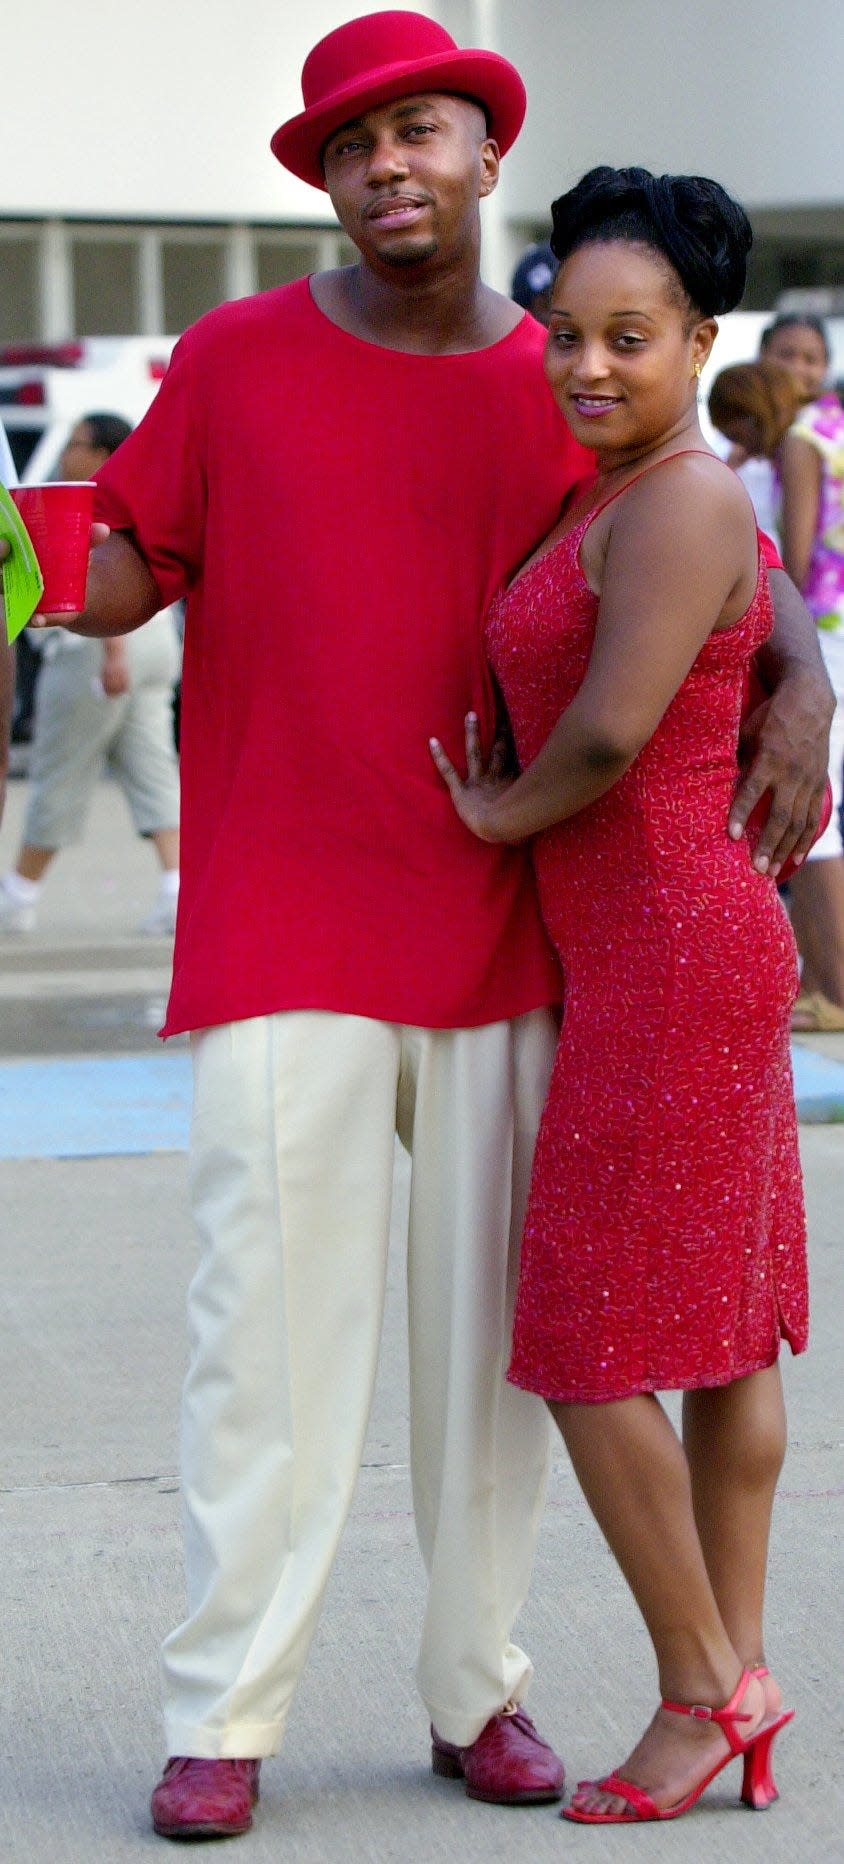 Orlando Junious of Bond Hill and Tracy Gibson of Colerain pose outside Cinergy Field on their way to the Coors Light Festival, July 20, 2001.